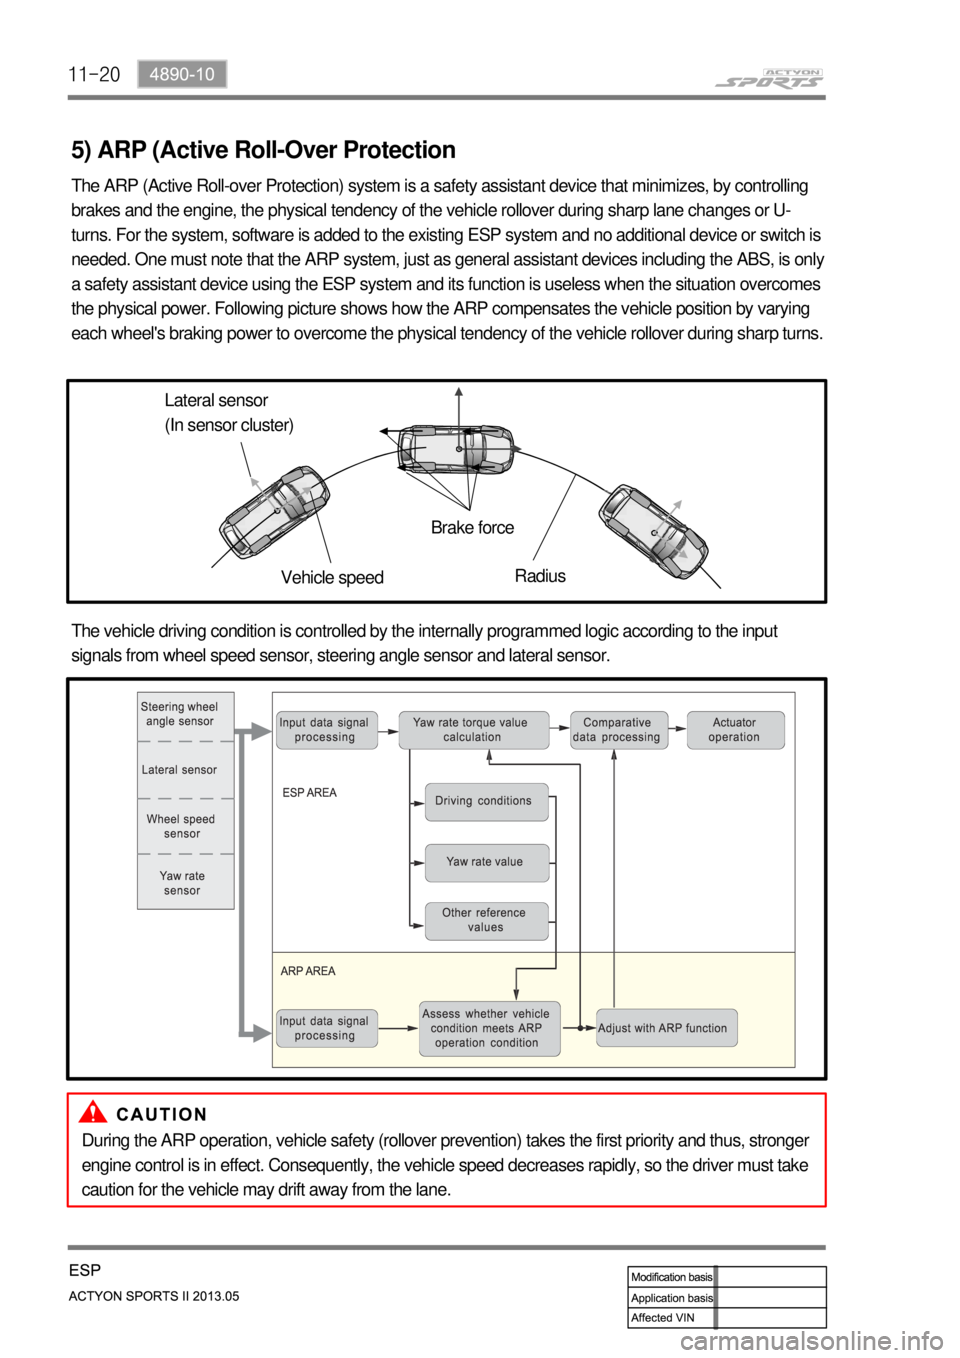 SSANGYONG NEW ACTYON SPORTS 2013 Workshop Manual 11-20
5) ARP (Active Roll-Over Protection
The ARP (Active Roll-over Protection) system is a safety assistant device that minimizes, by controlling 
brakes and the engine, the physical tendency of the 